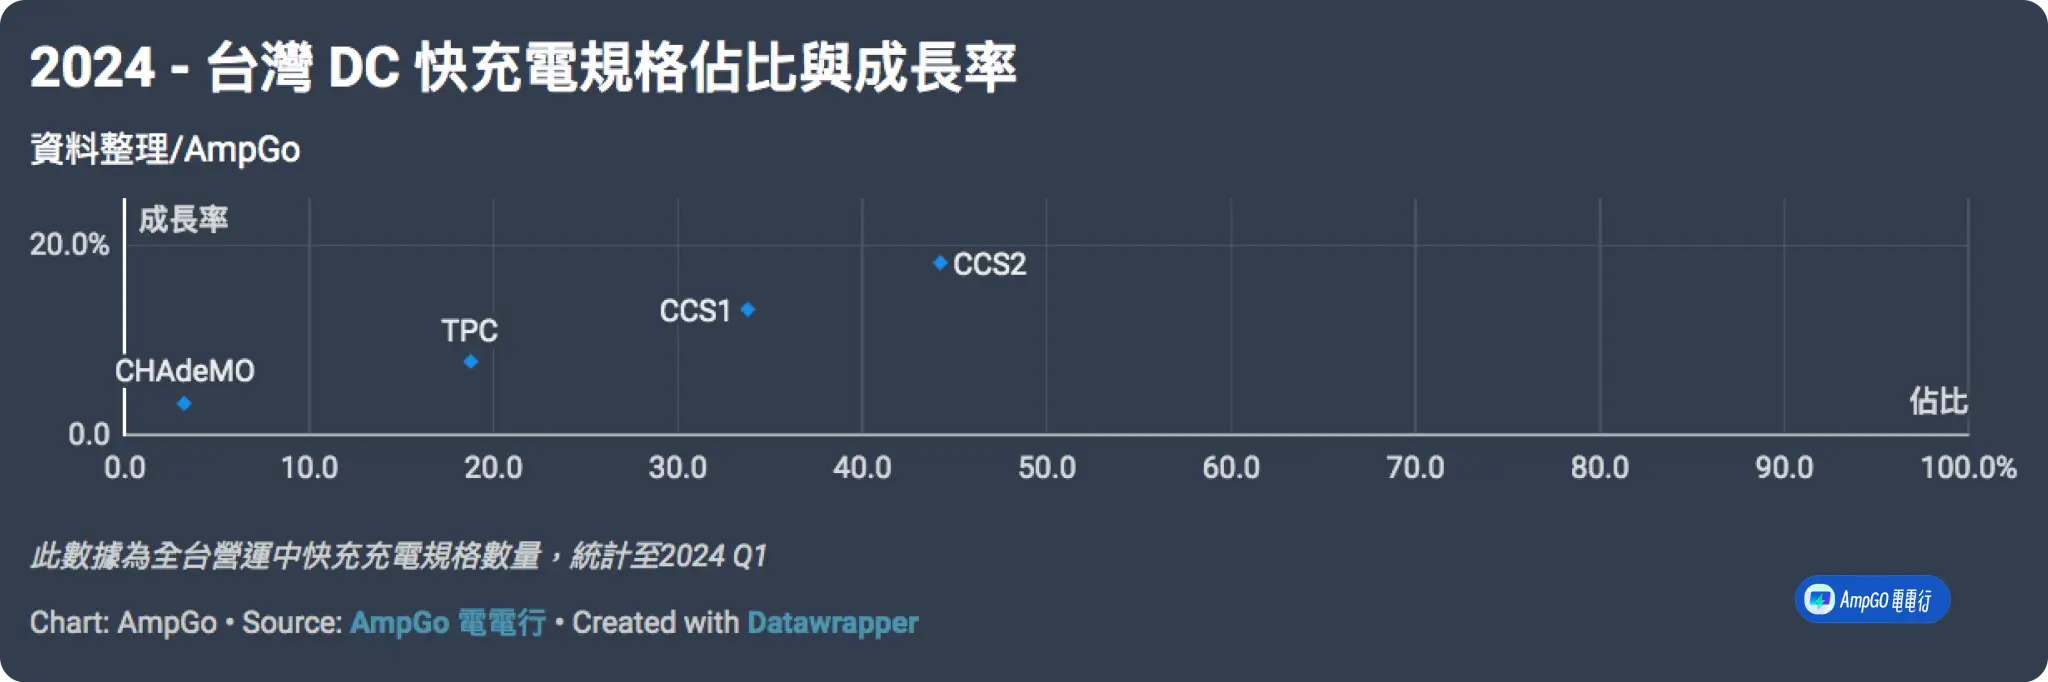 2024 taiwan dc fast charging specs share growth rate